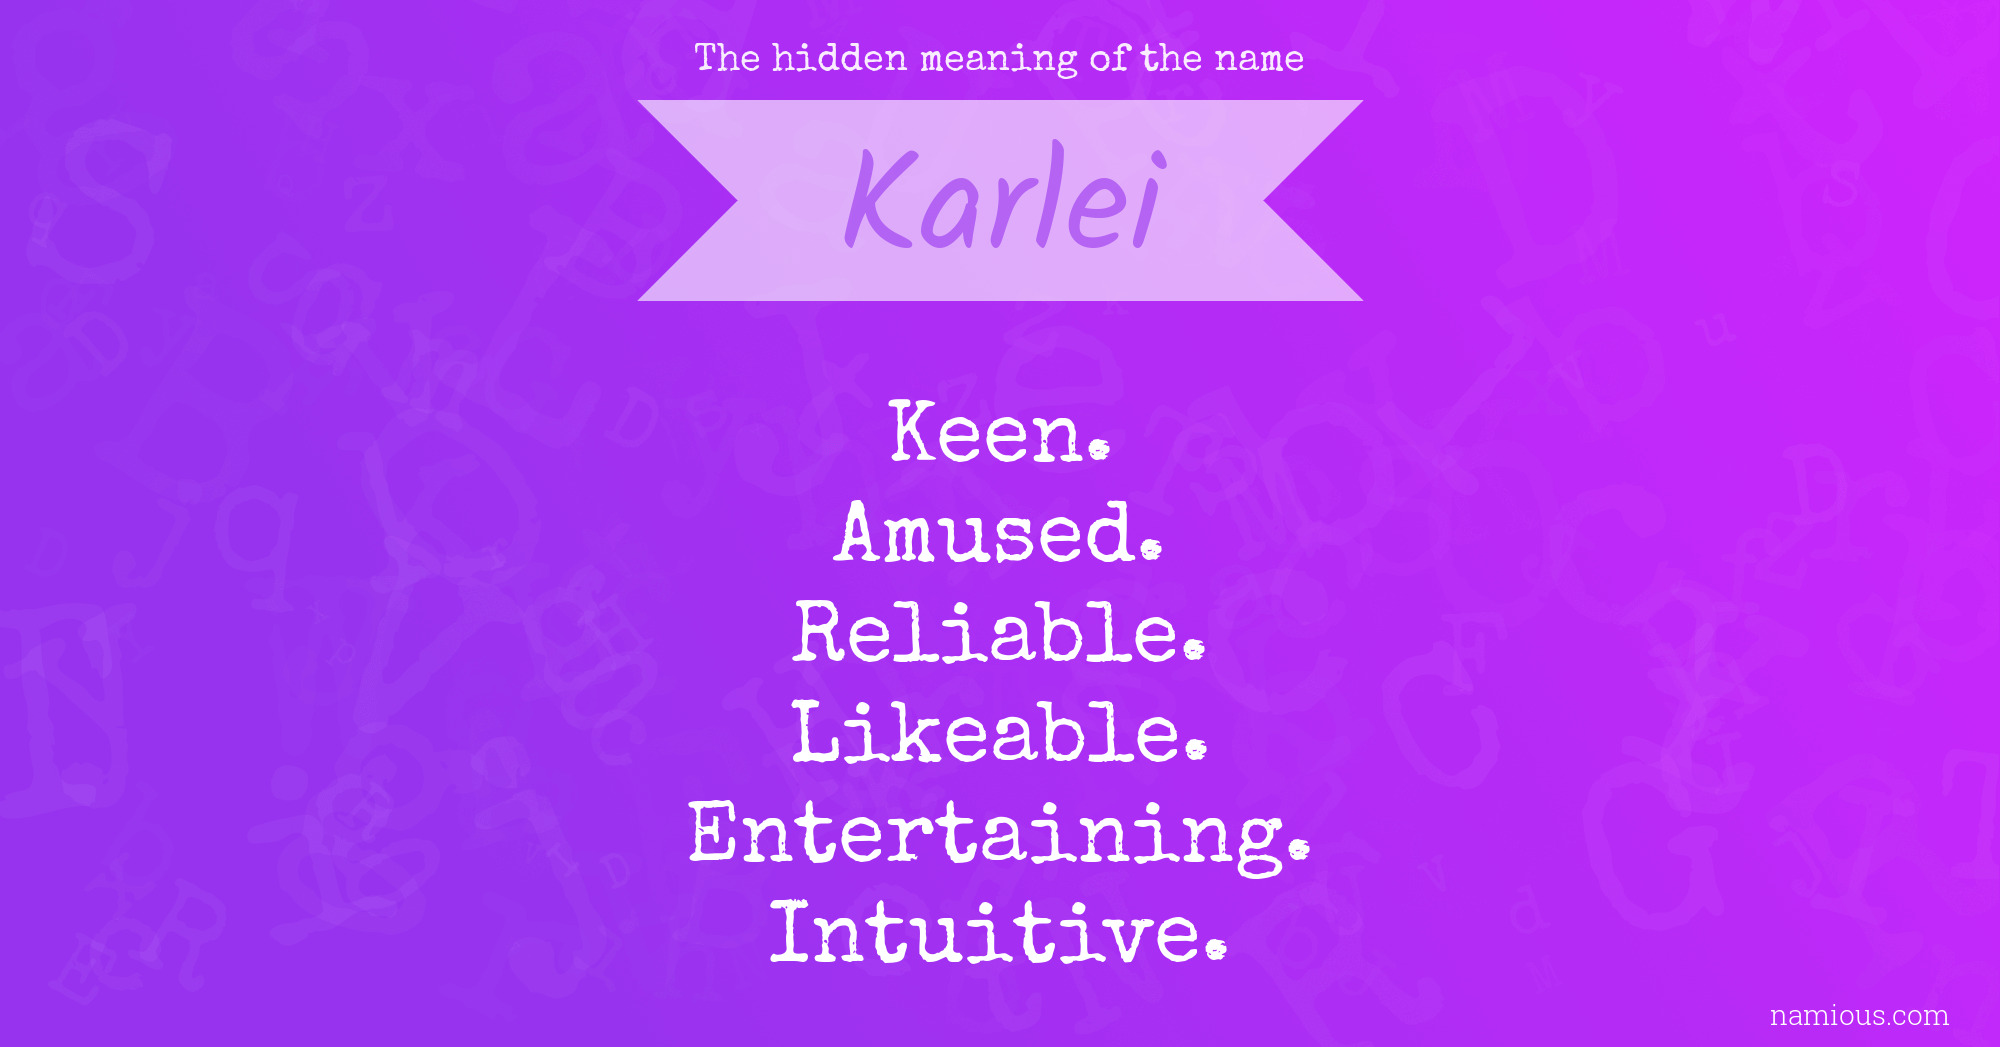 The hidden meaning of the name Karlei